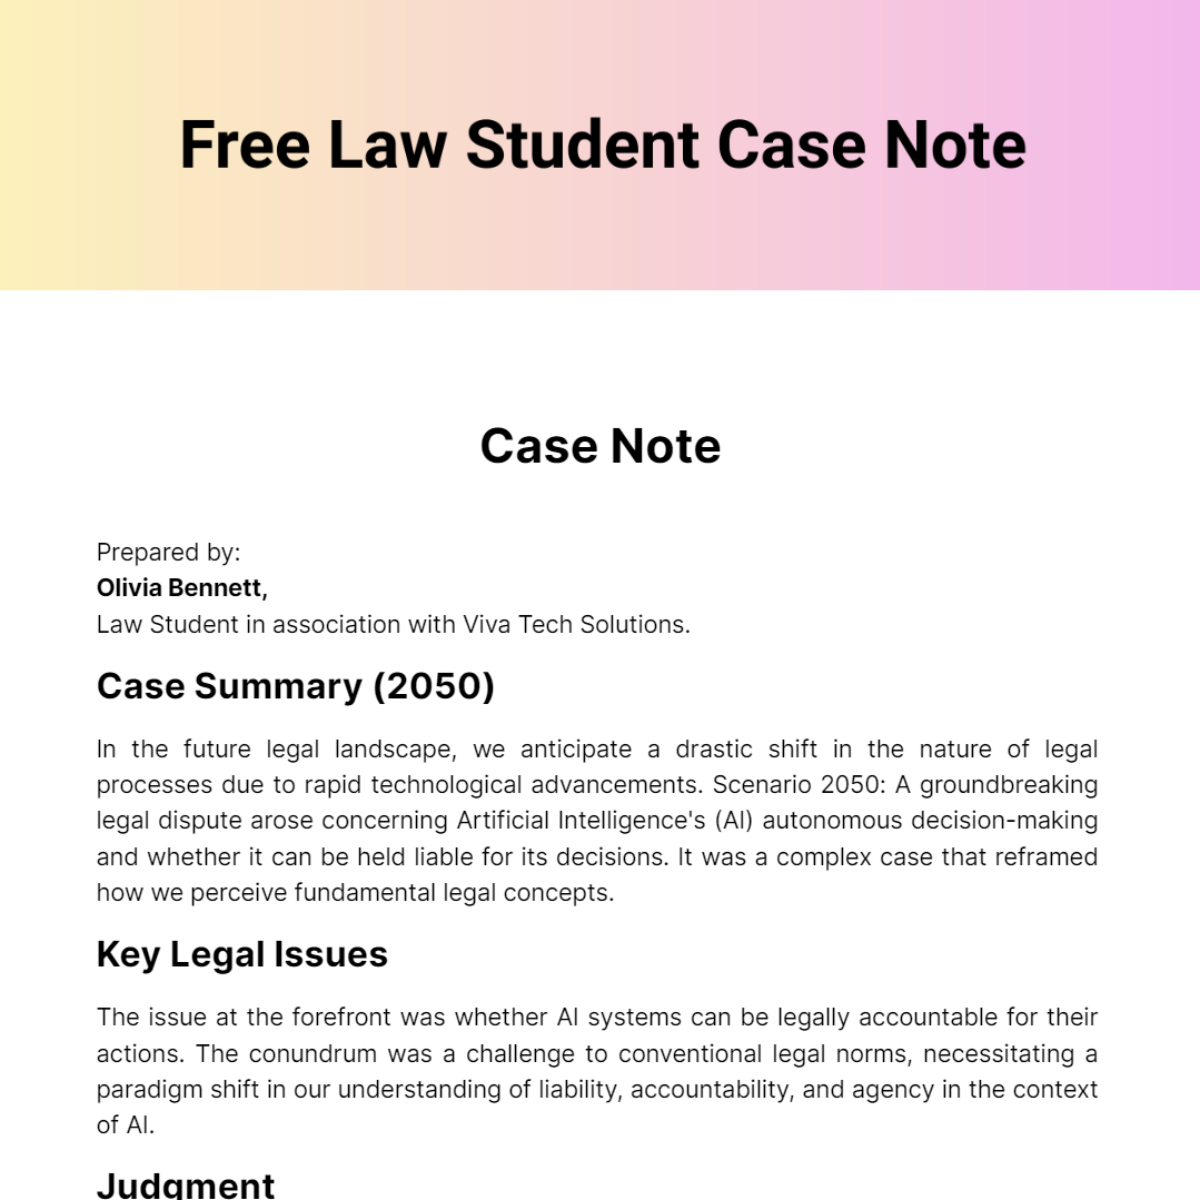 Free Law Student Case Note Template